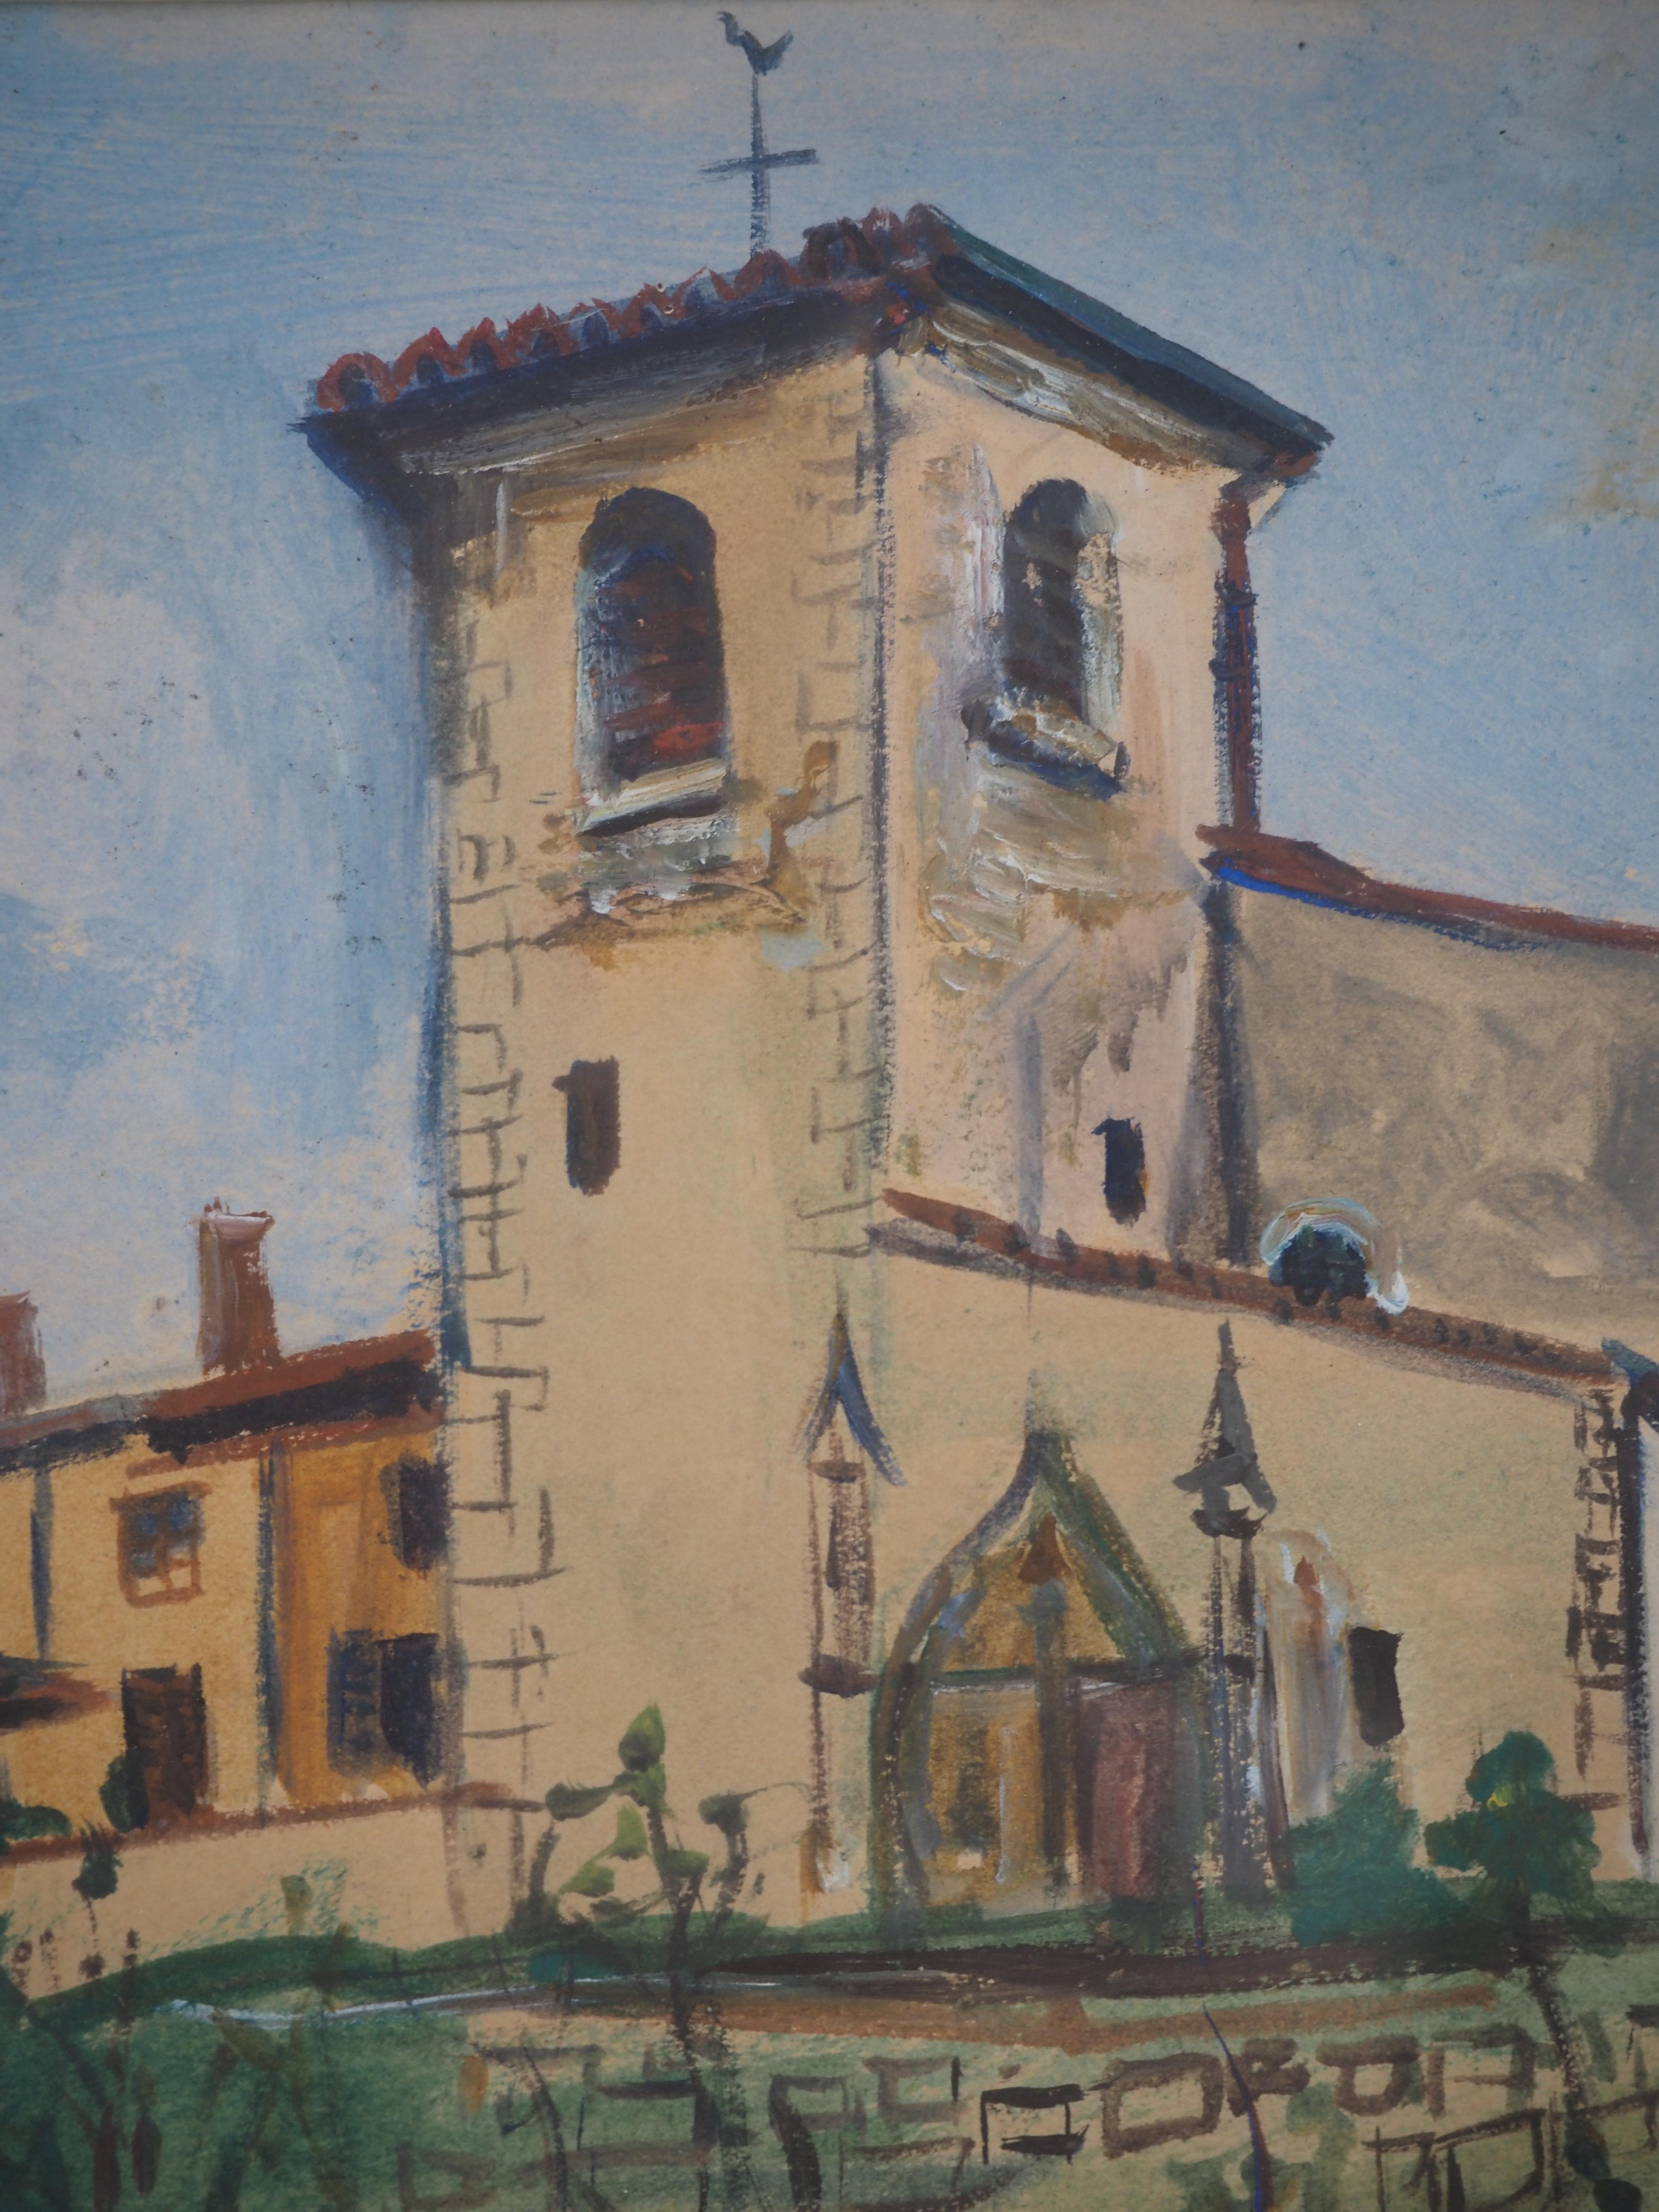 Church of St Bernard - Original gouache on paper, Handsigned - Gray Landscape Painting by Maurice Utrillo